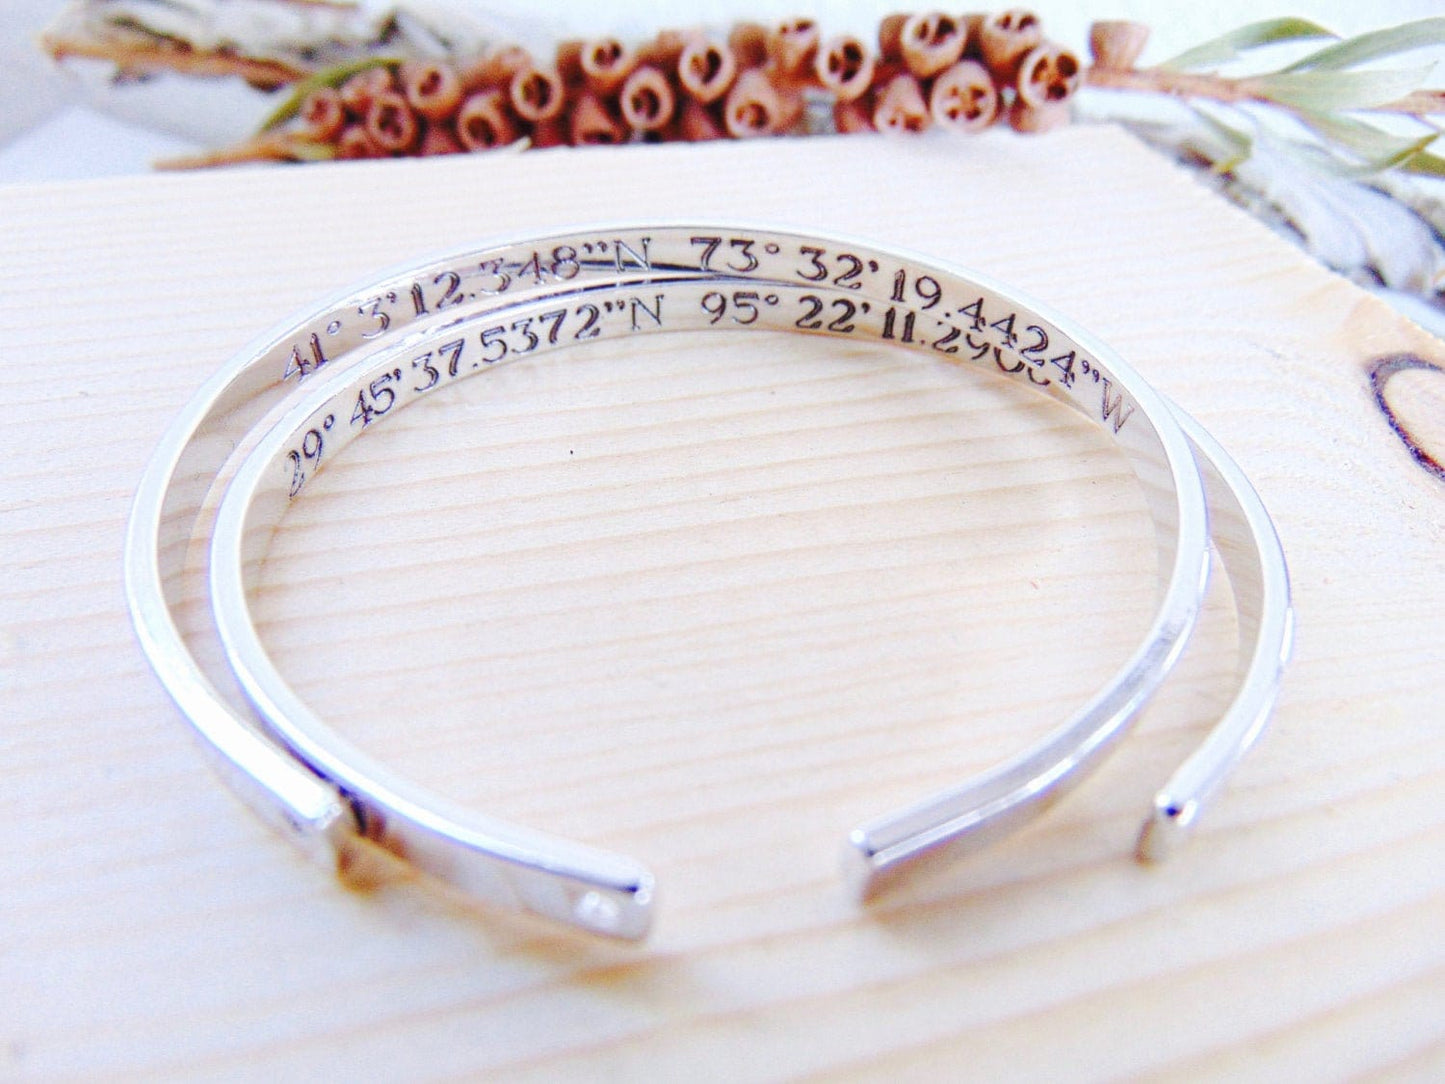 Personalized engraving on cuff bracelet in silver, gold, rose gold